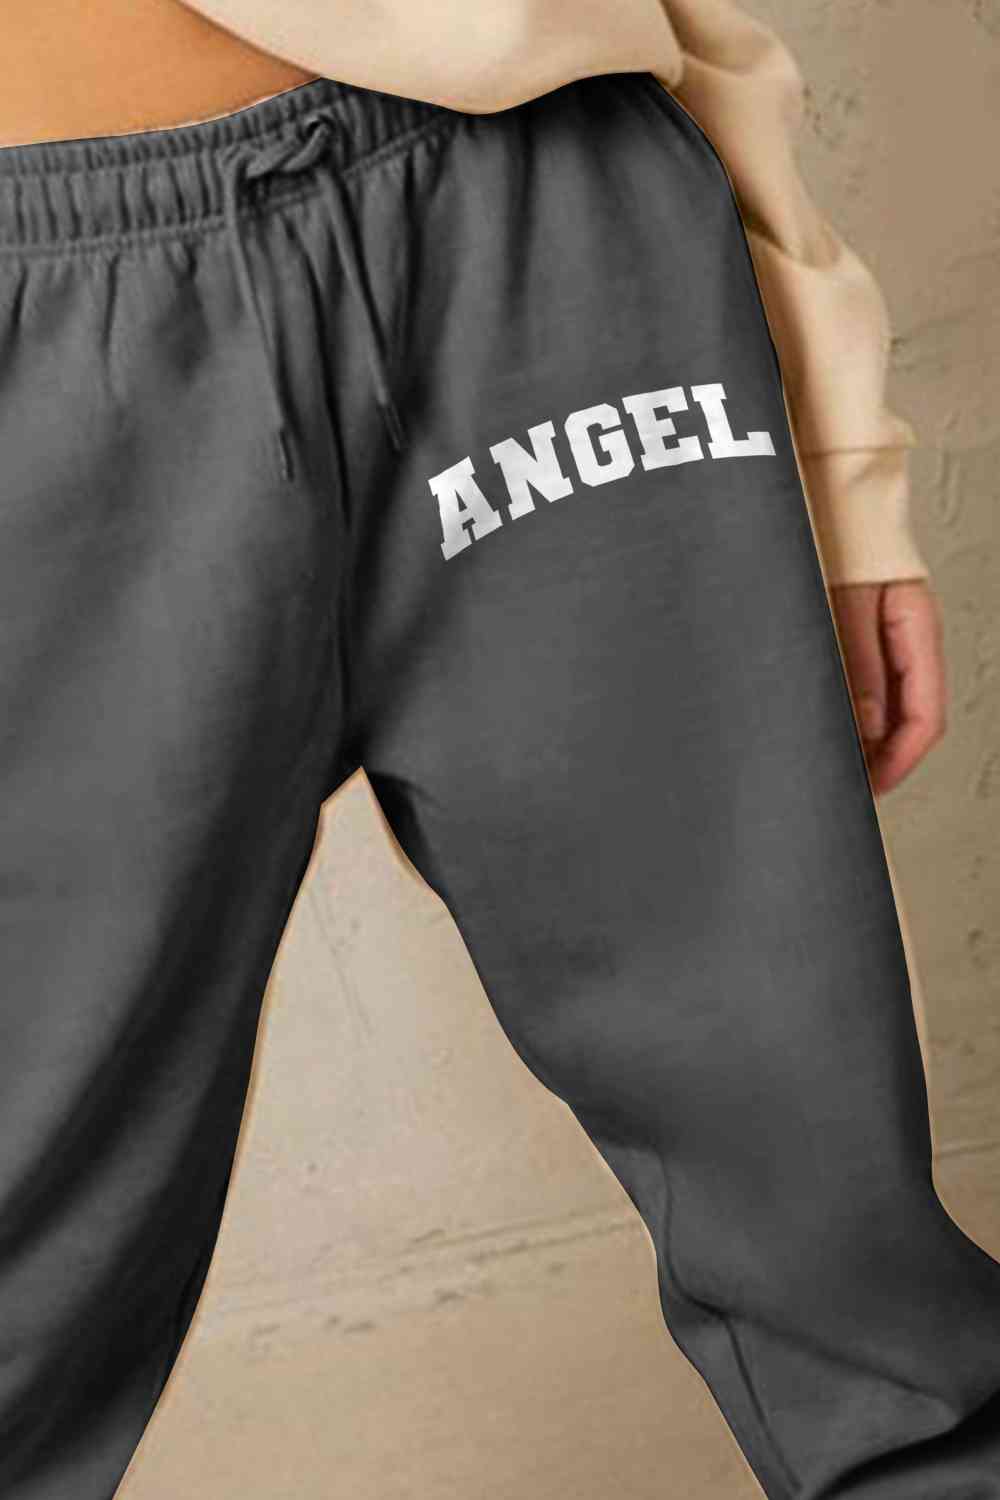 Simply Love Simply Love Full Size Drawstring Angel Graphic Long Sweatpants - GemThreads Boutique